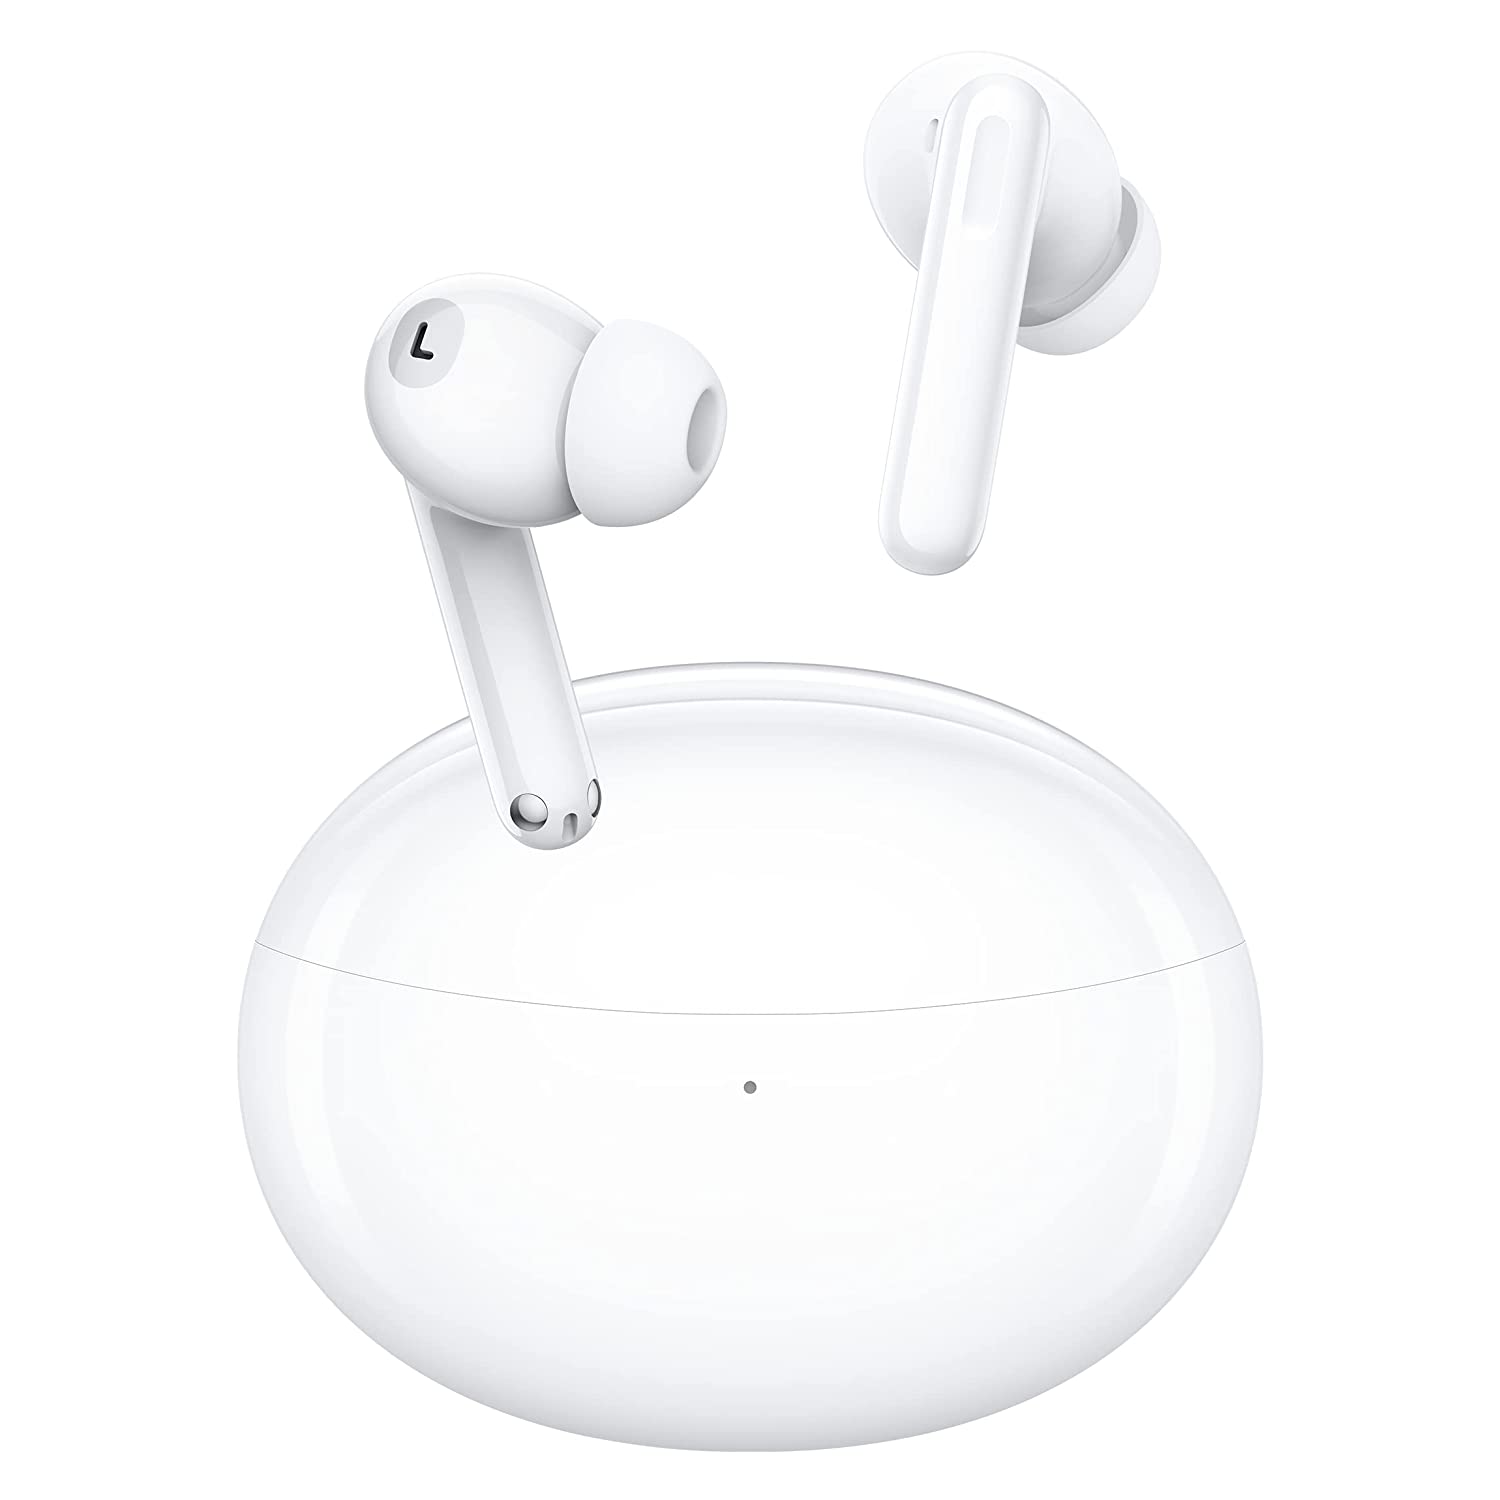 OPPO Enco Air 2 Pro Bluetooth Truly Wireless in Ear Earbuds with Mic, Fast  Charging & Up to 28Hrs - Grey